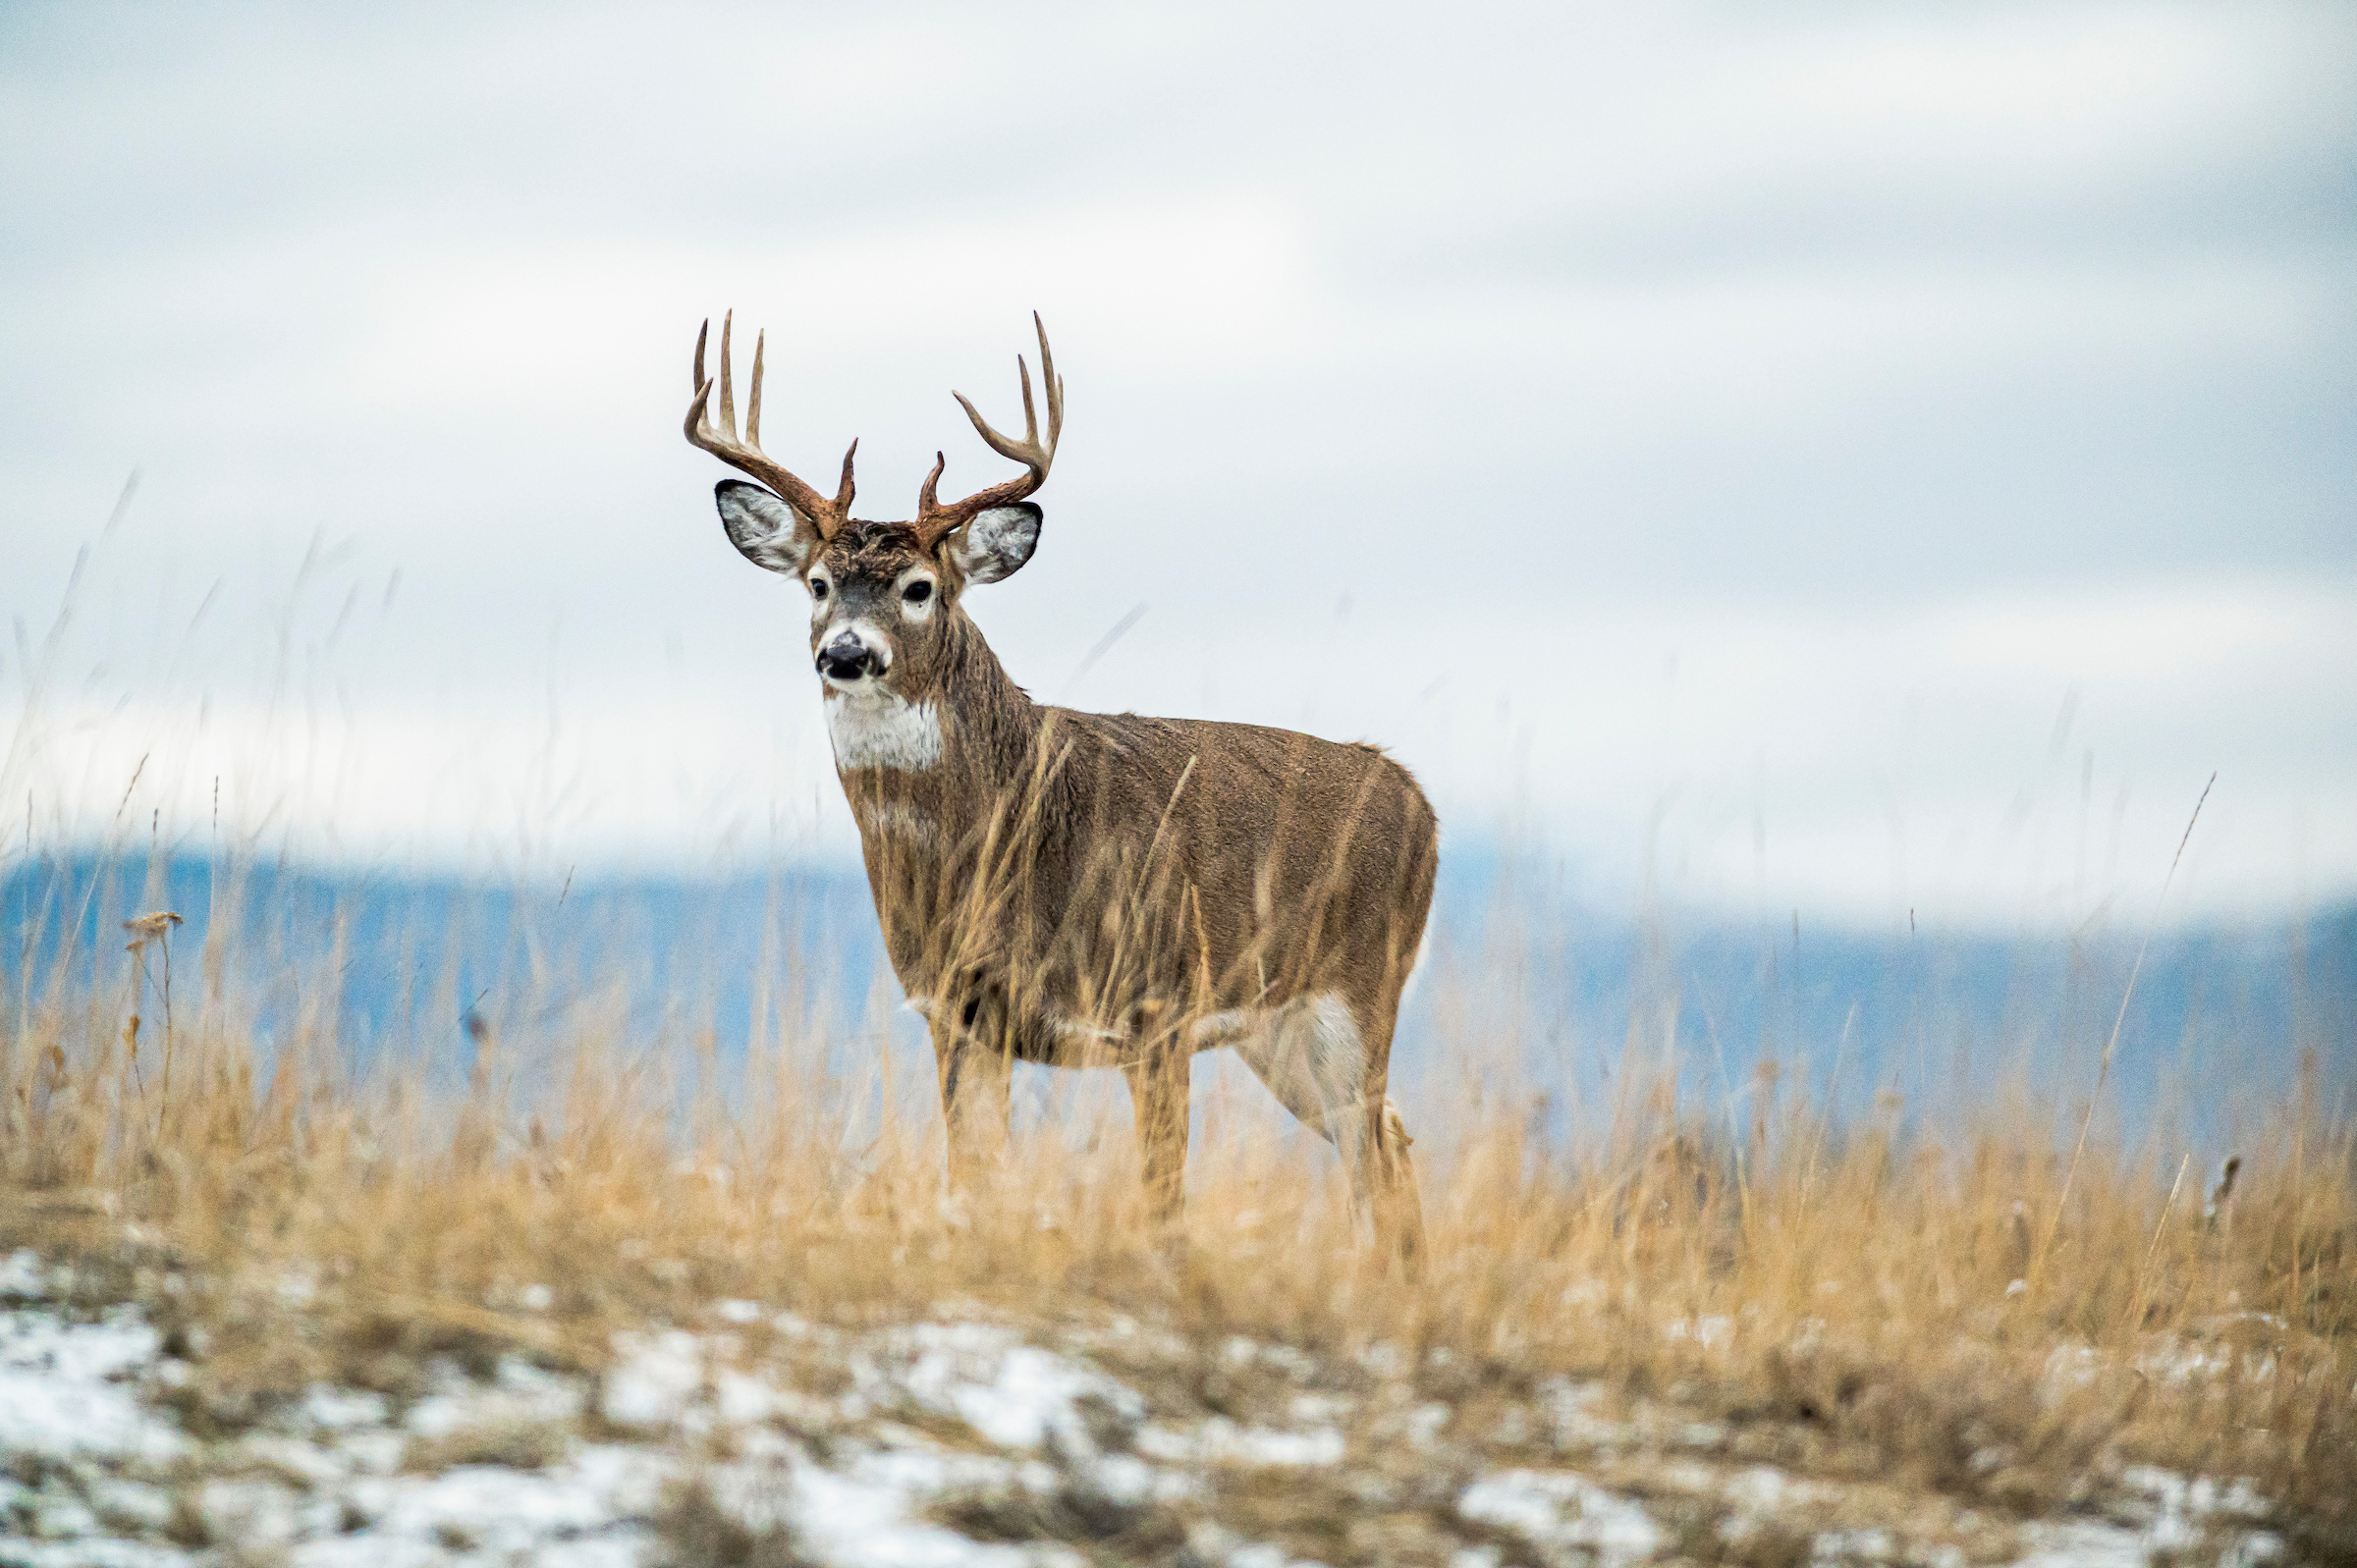 Ohio deer carry COVID virus: how hunters can protect themselves